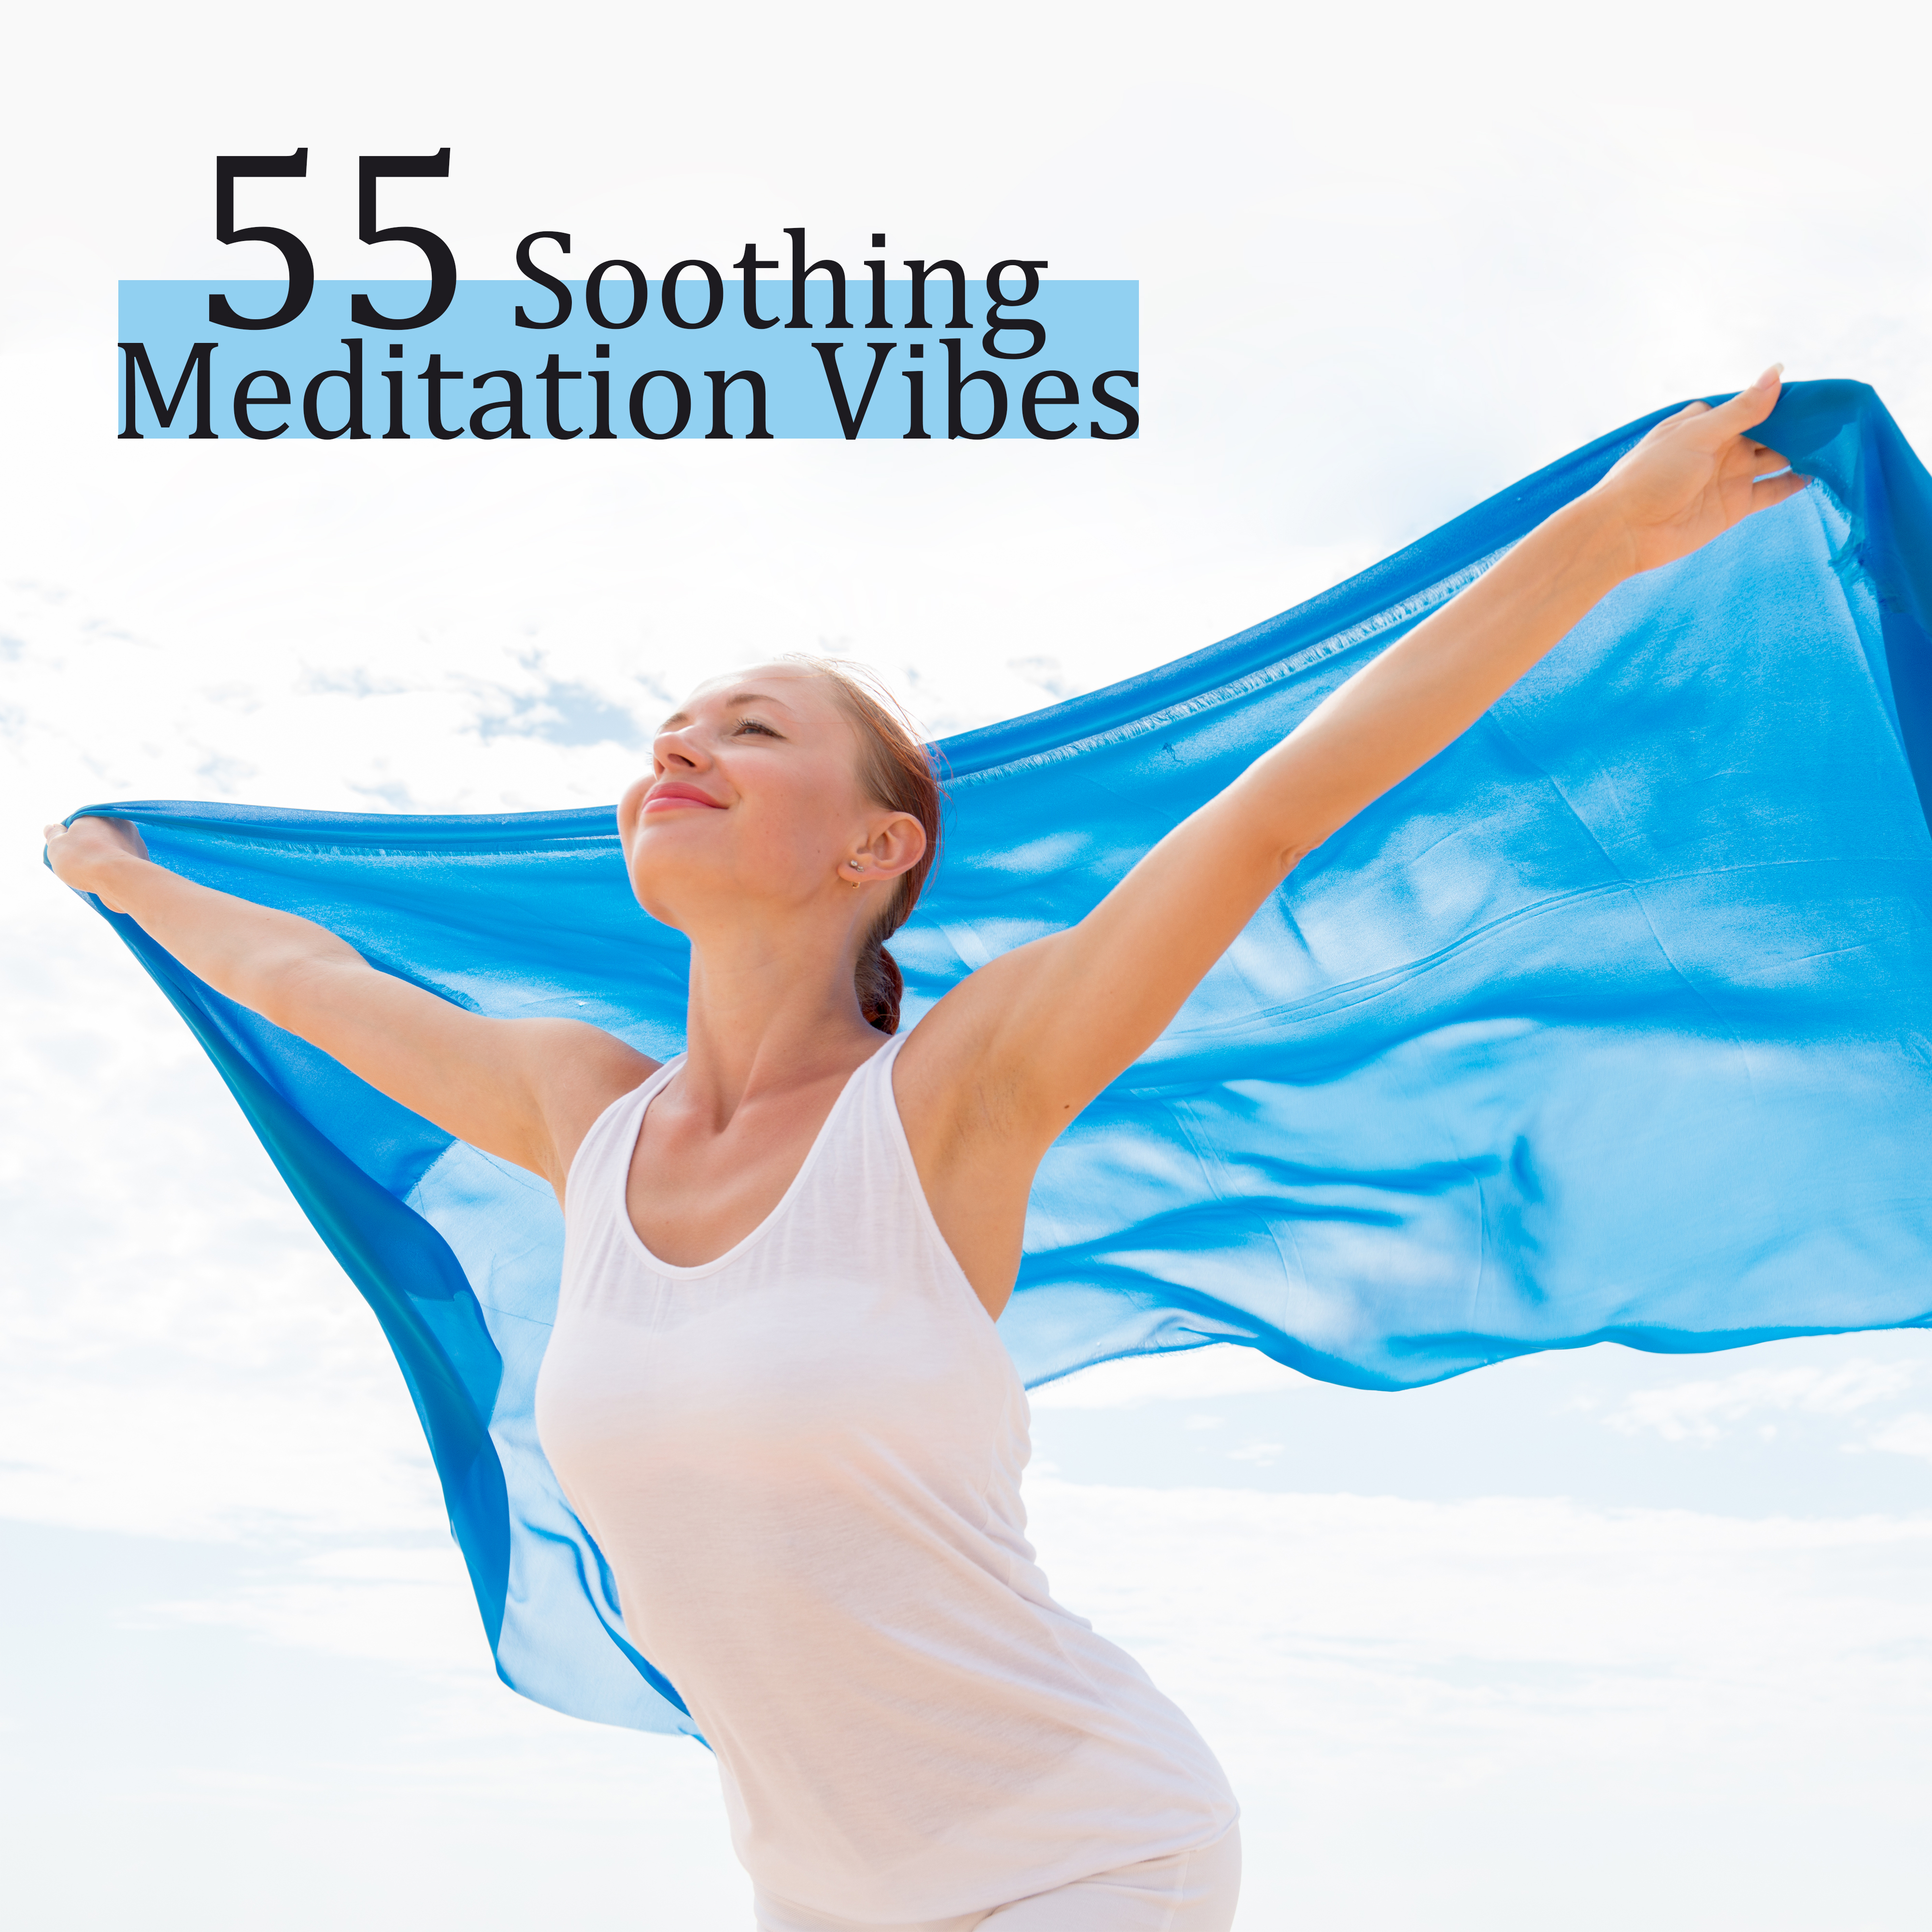 55 Soothing Meditation Vibes